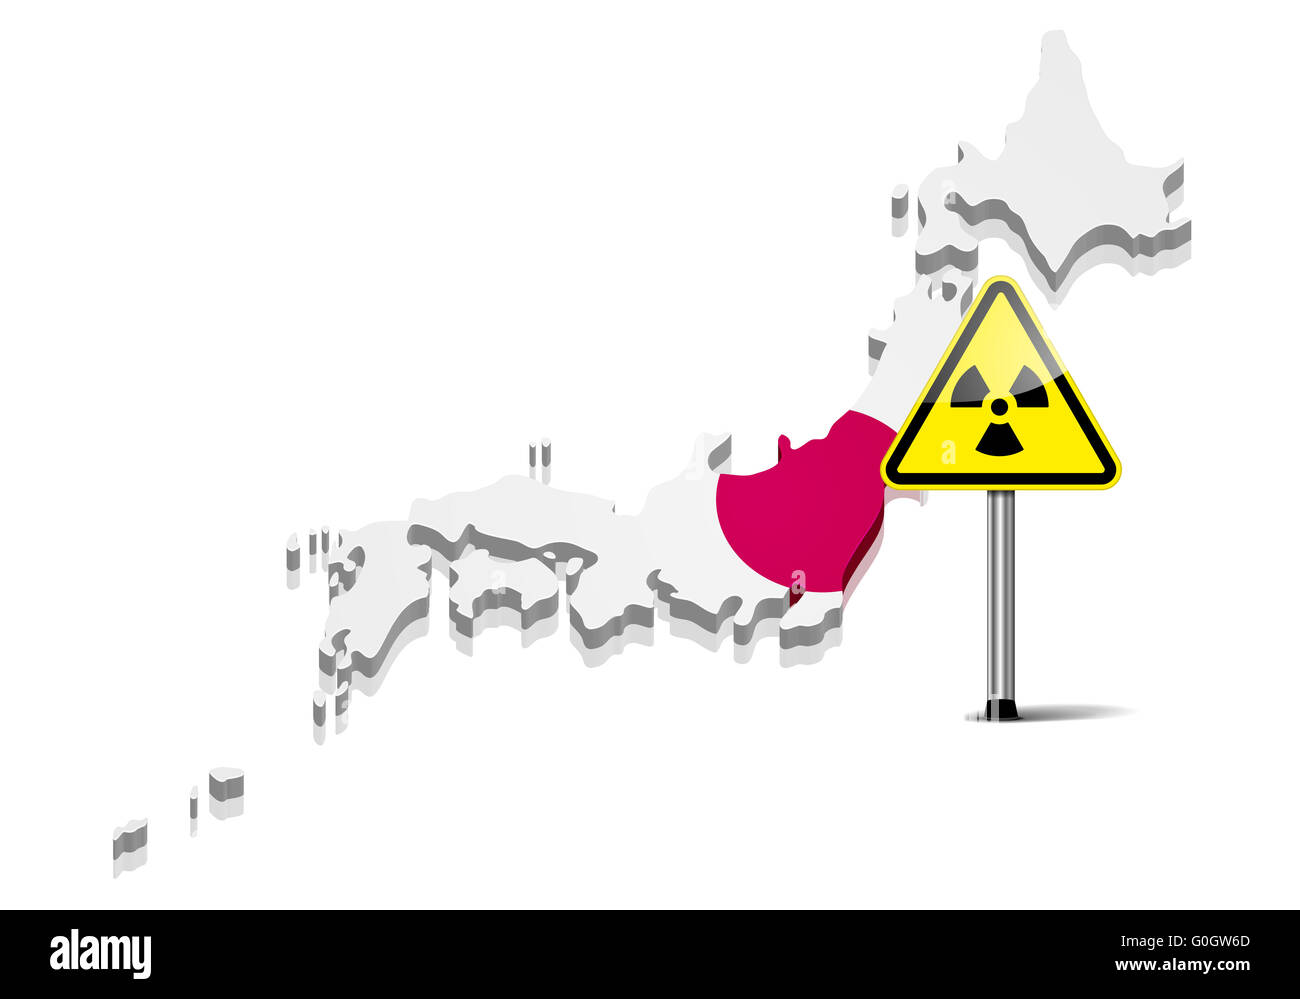 Japan with Radiation Sign Stock Photo